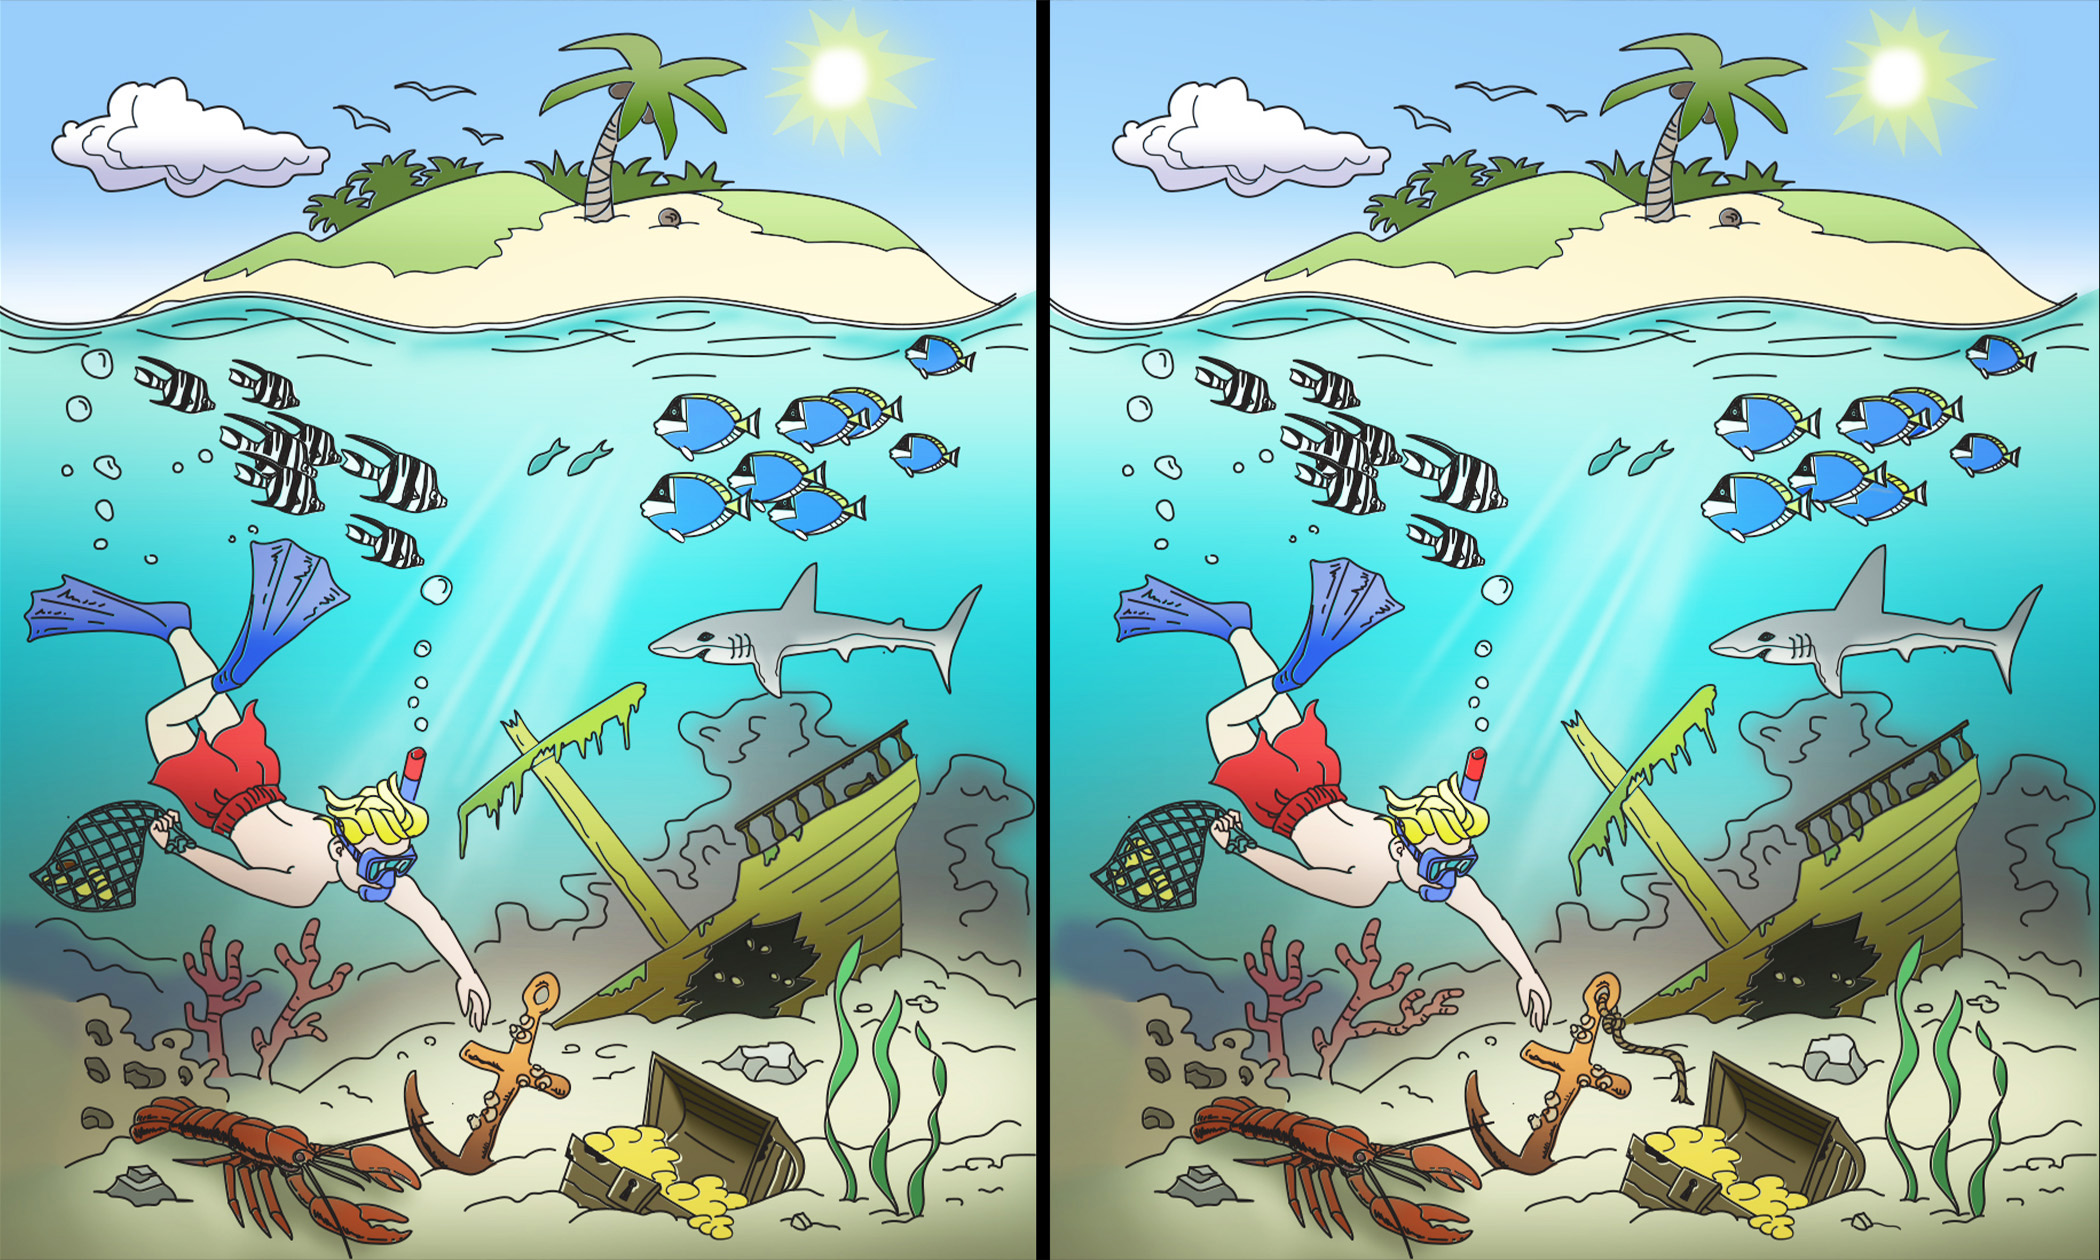 can-you-spot-11-differences-hidden-in-these-2-balmy-underwater-scenes